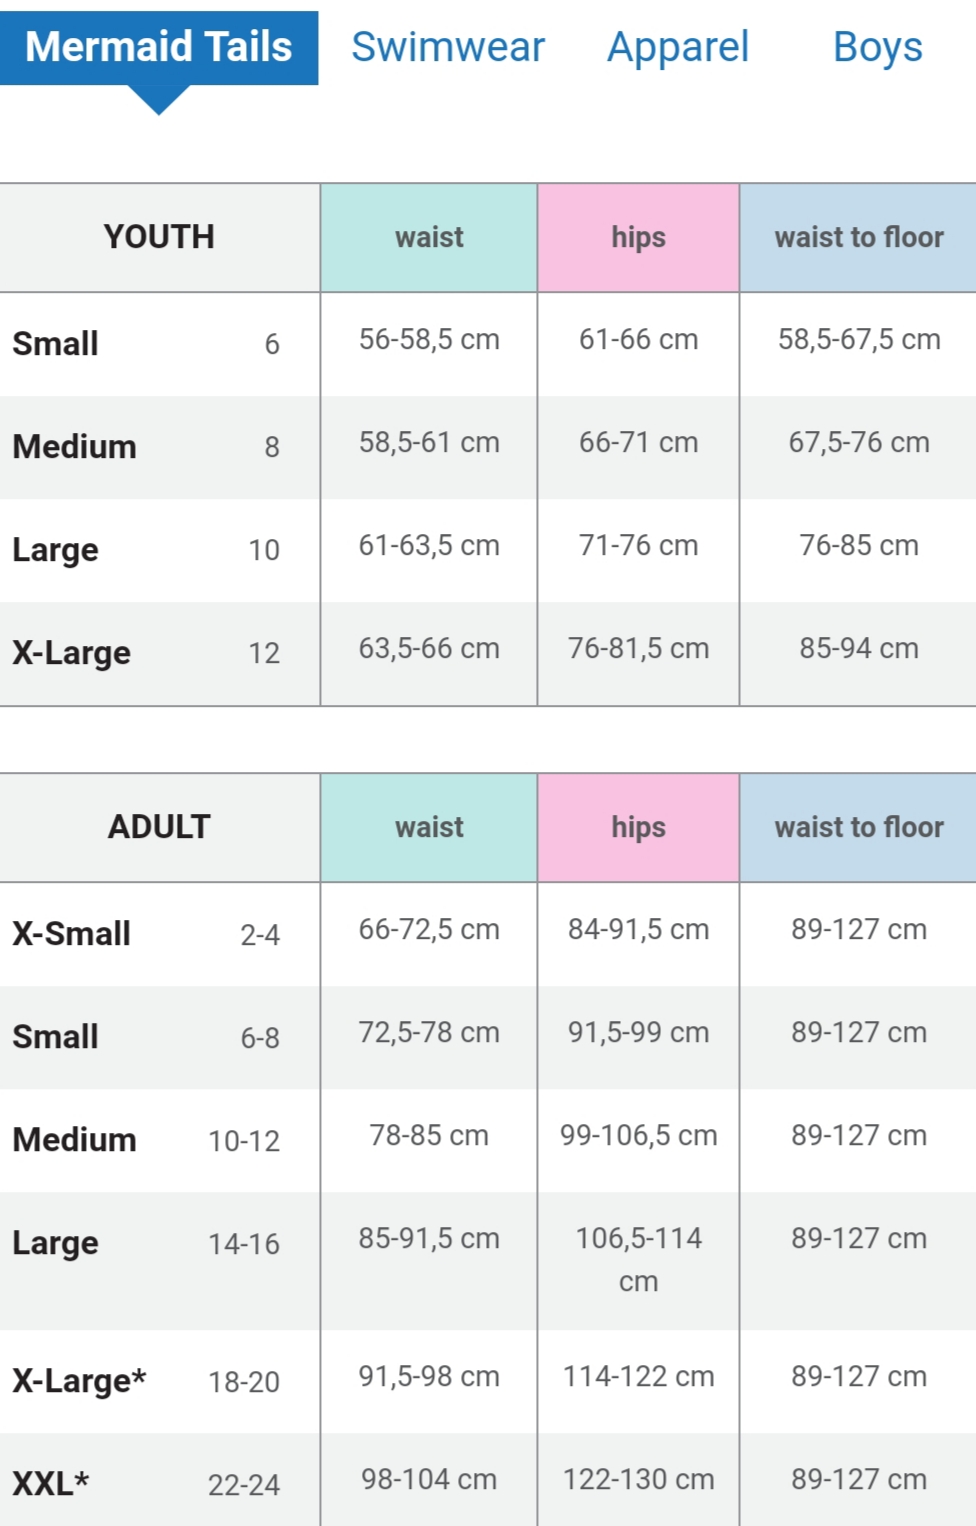 Size chart for Fin Fun tails and products | mertopiaaquaacademy.com.au